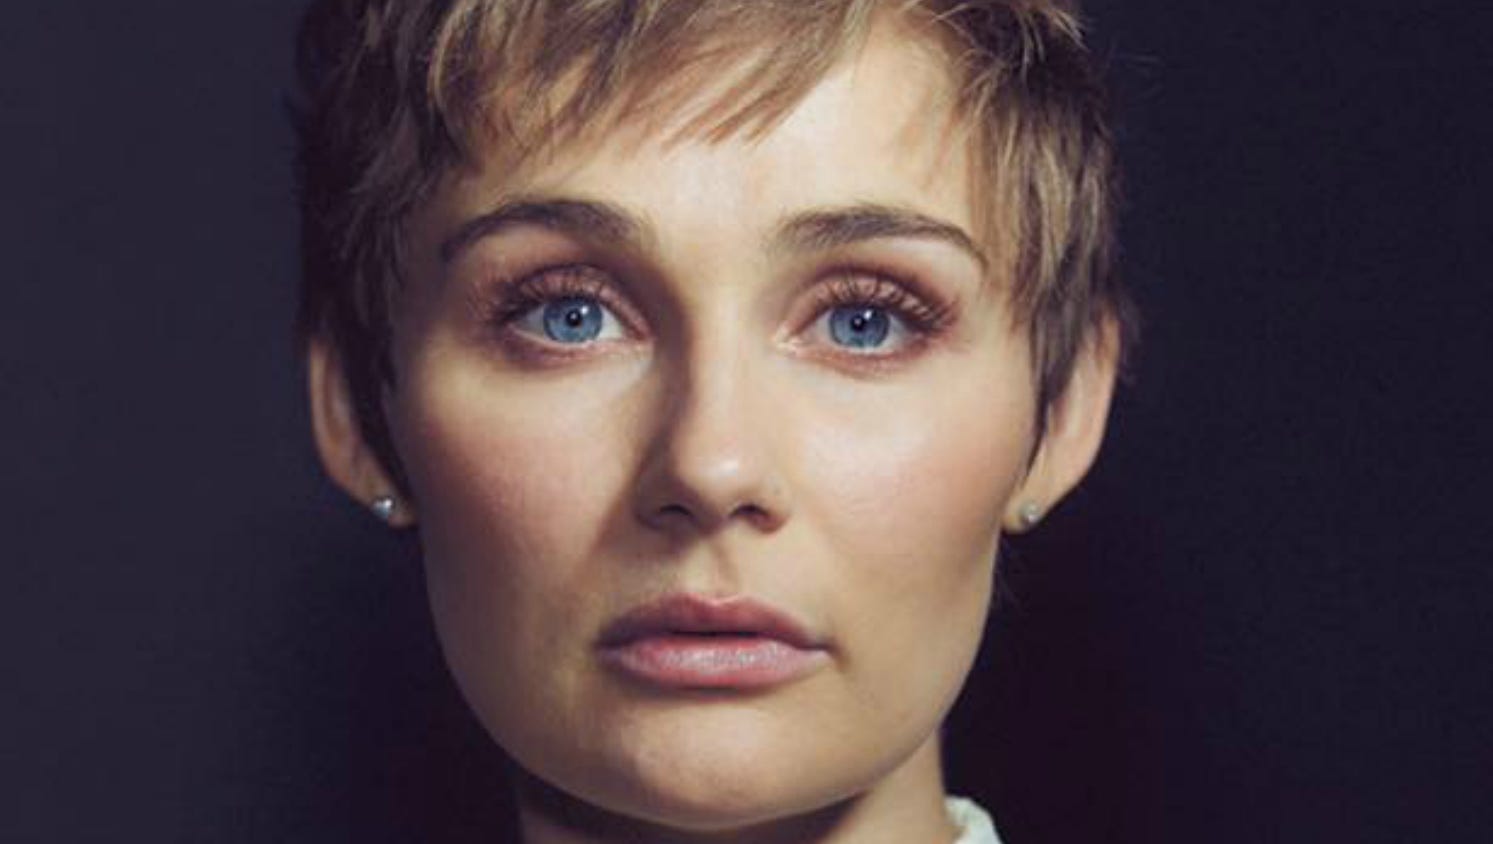 Clare Bowen’s Plastic Surgery – What We Know So Far